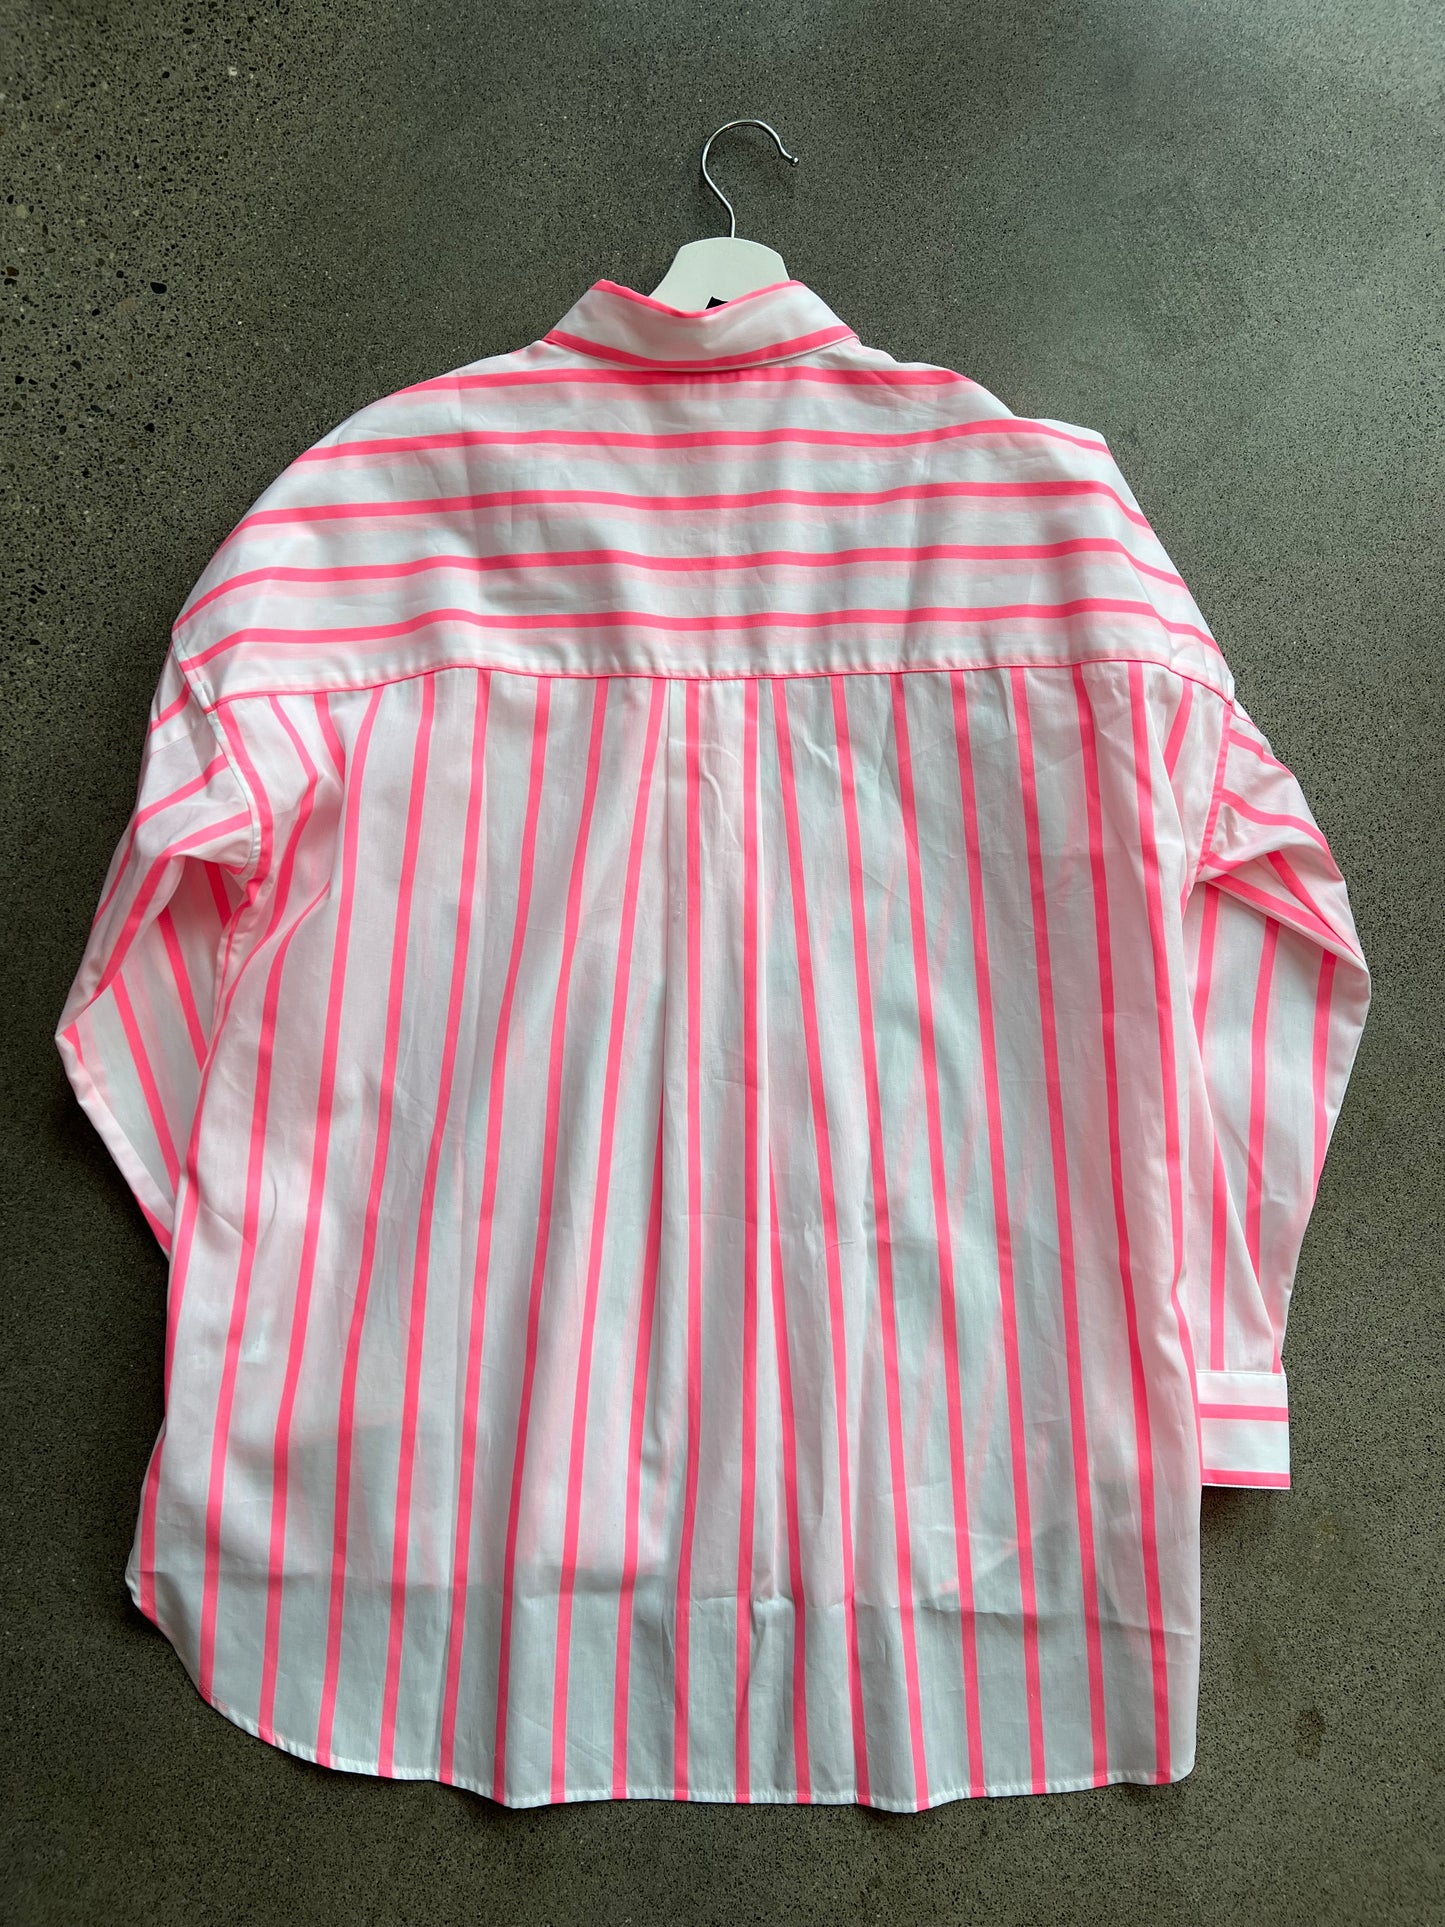 Caliban White shirt with Neon Pink Stripes